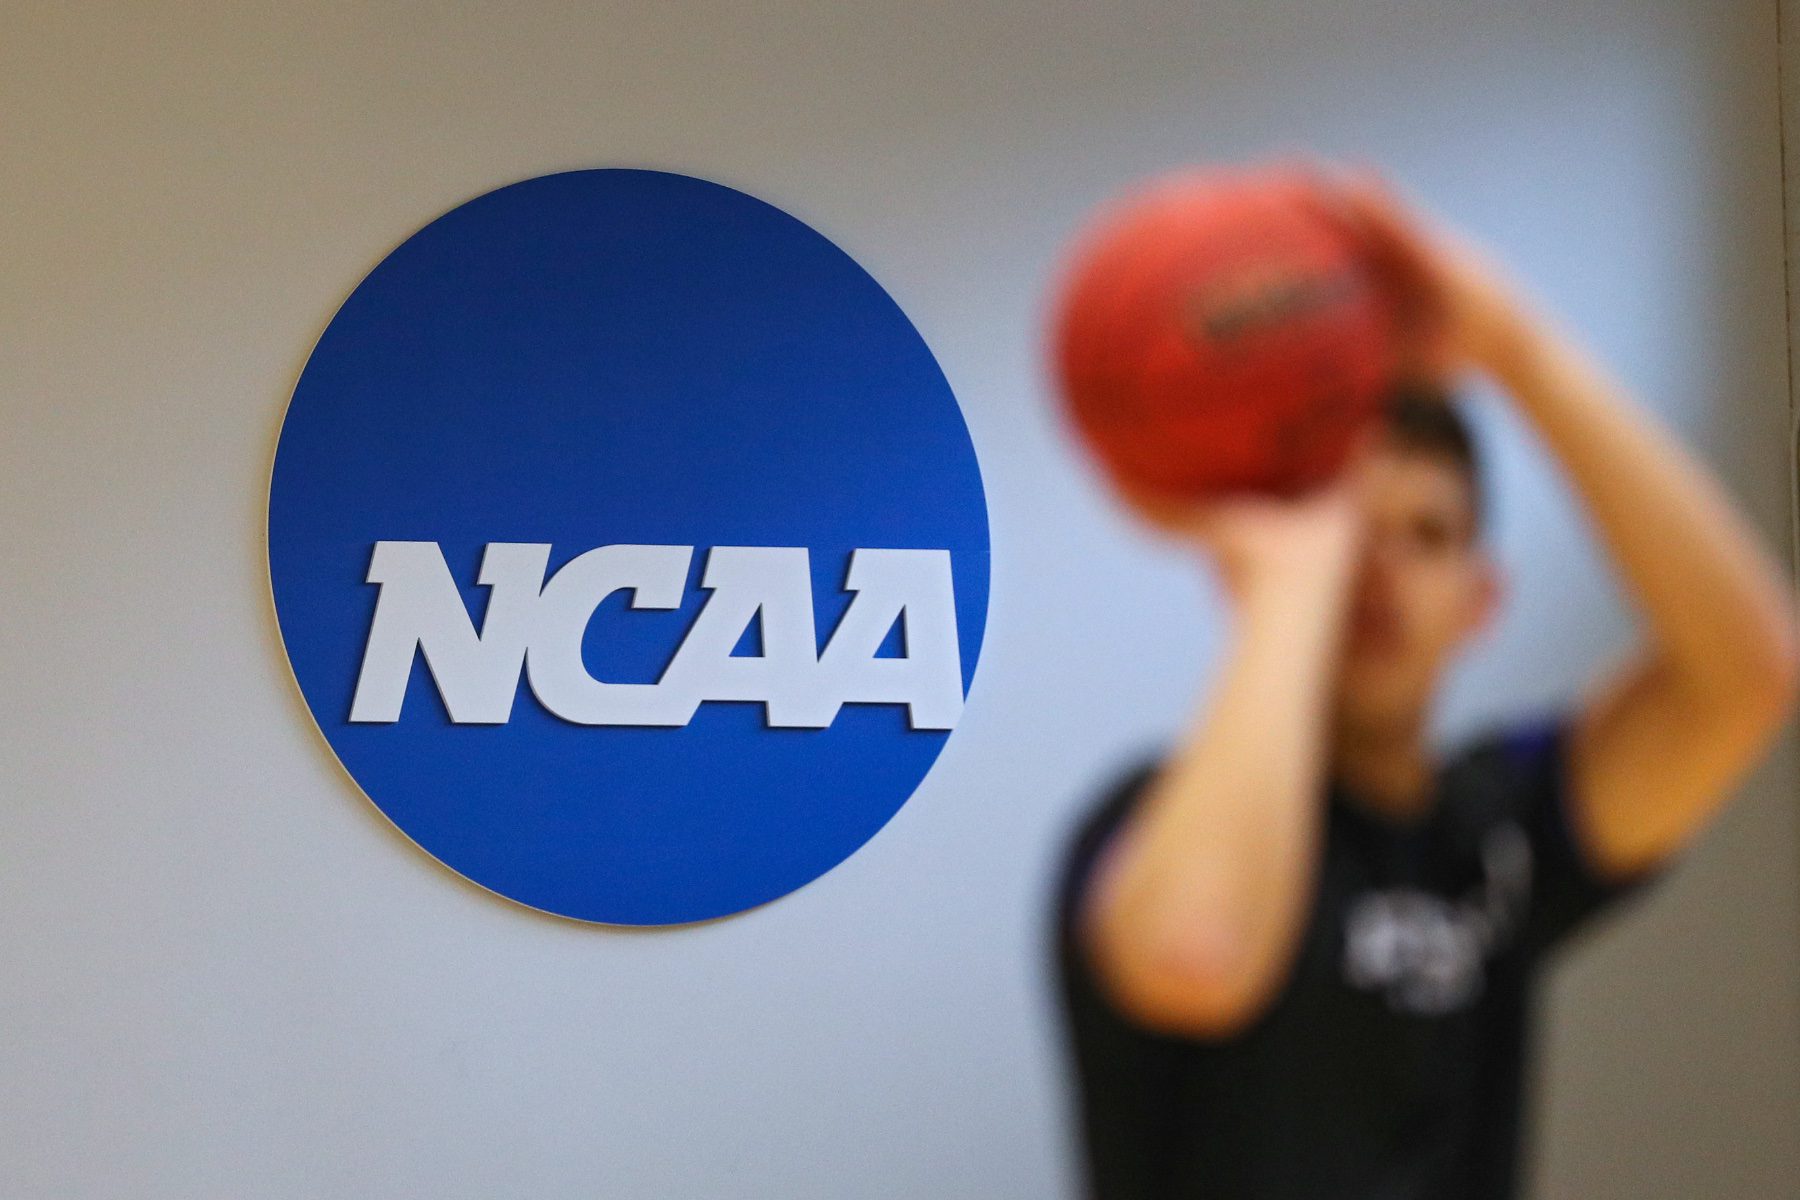 A person prepares to shoot a basketball standing in front of a NCAA logo.